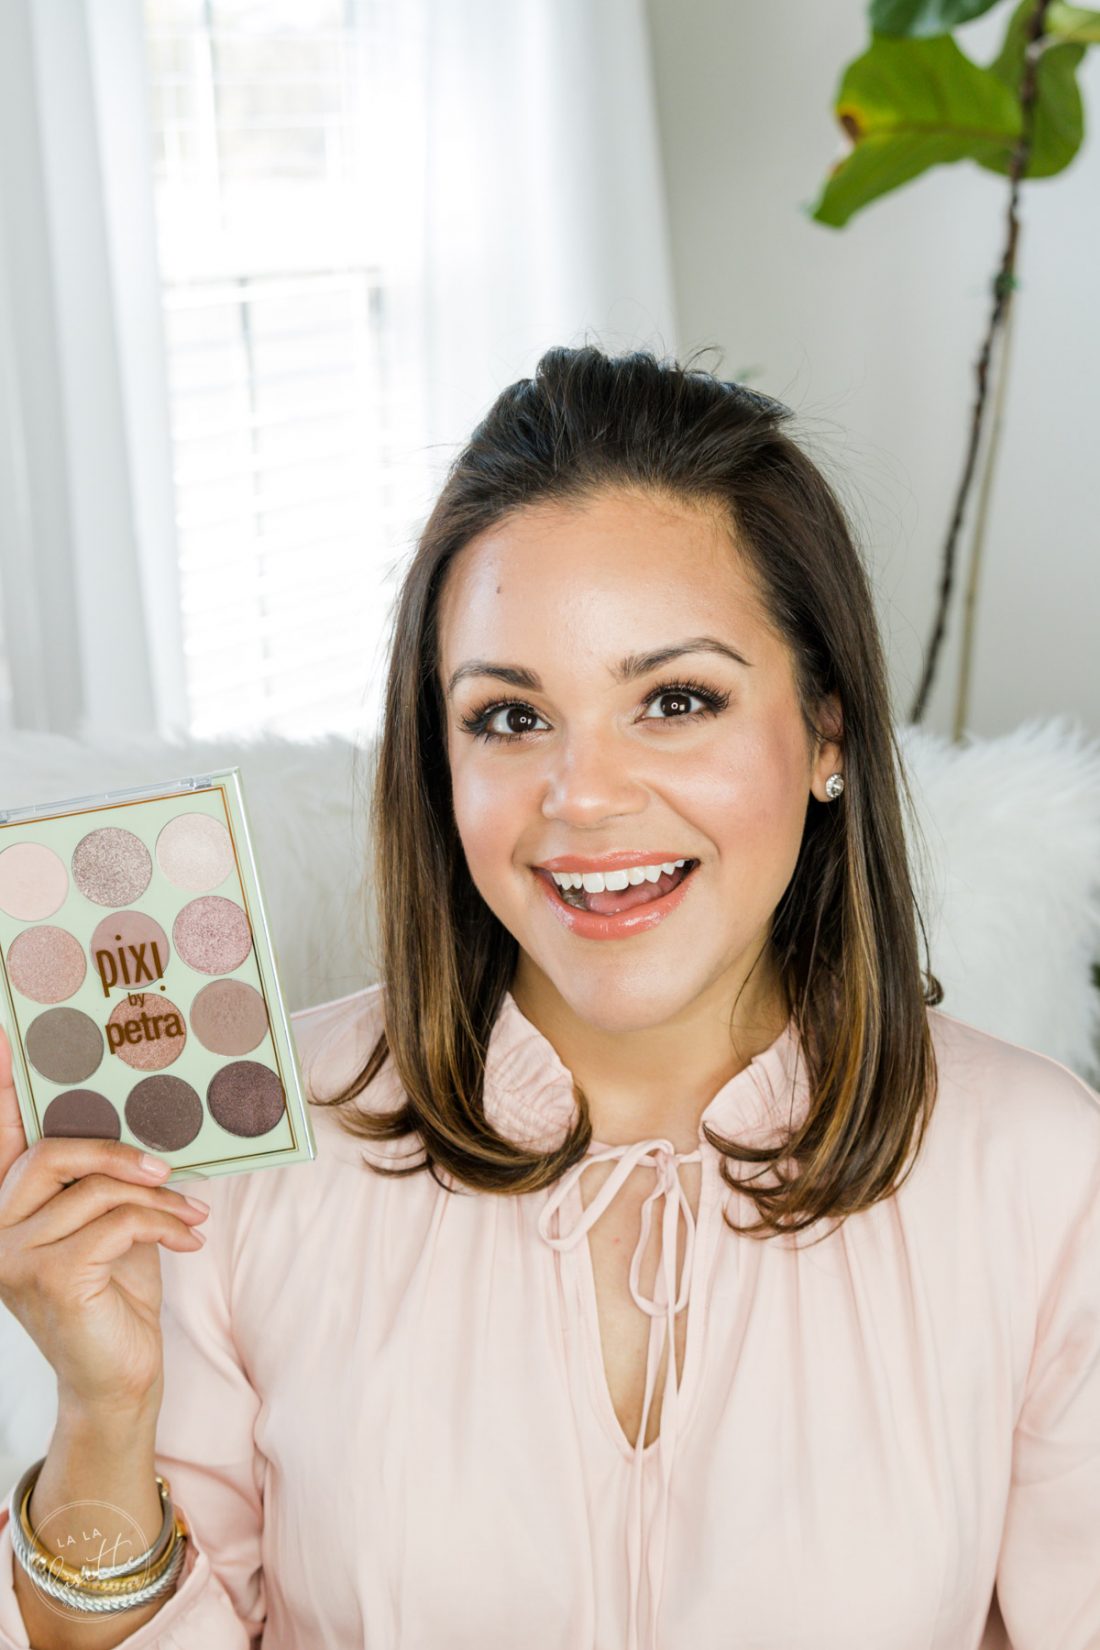 Beauty blogger with glowing spring makeup holding Pixi by Petra eyeshadow palette